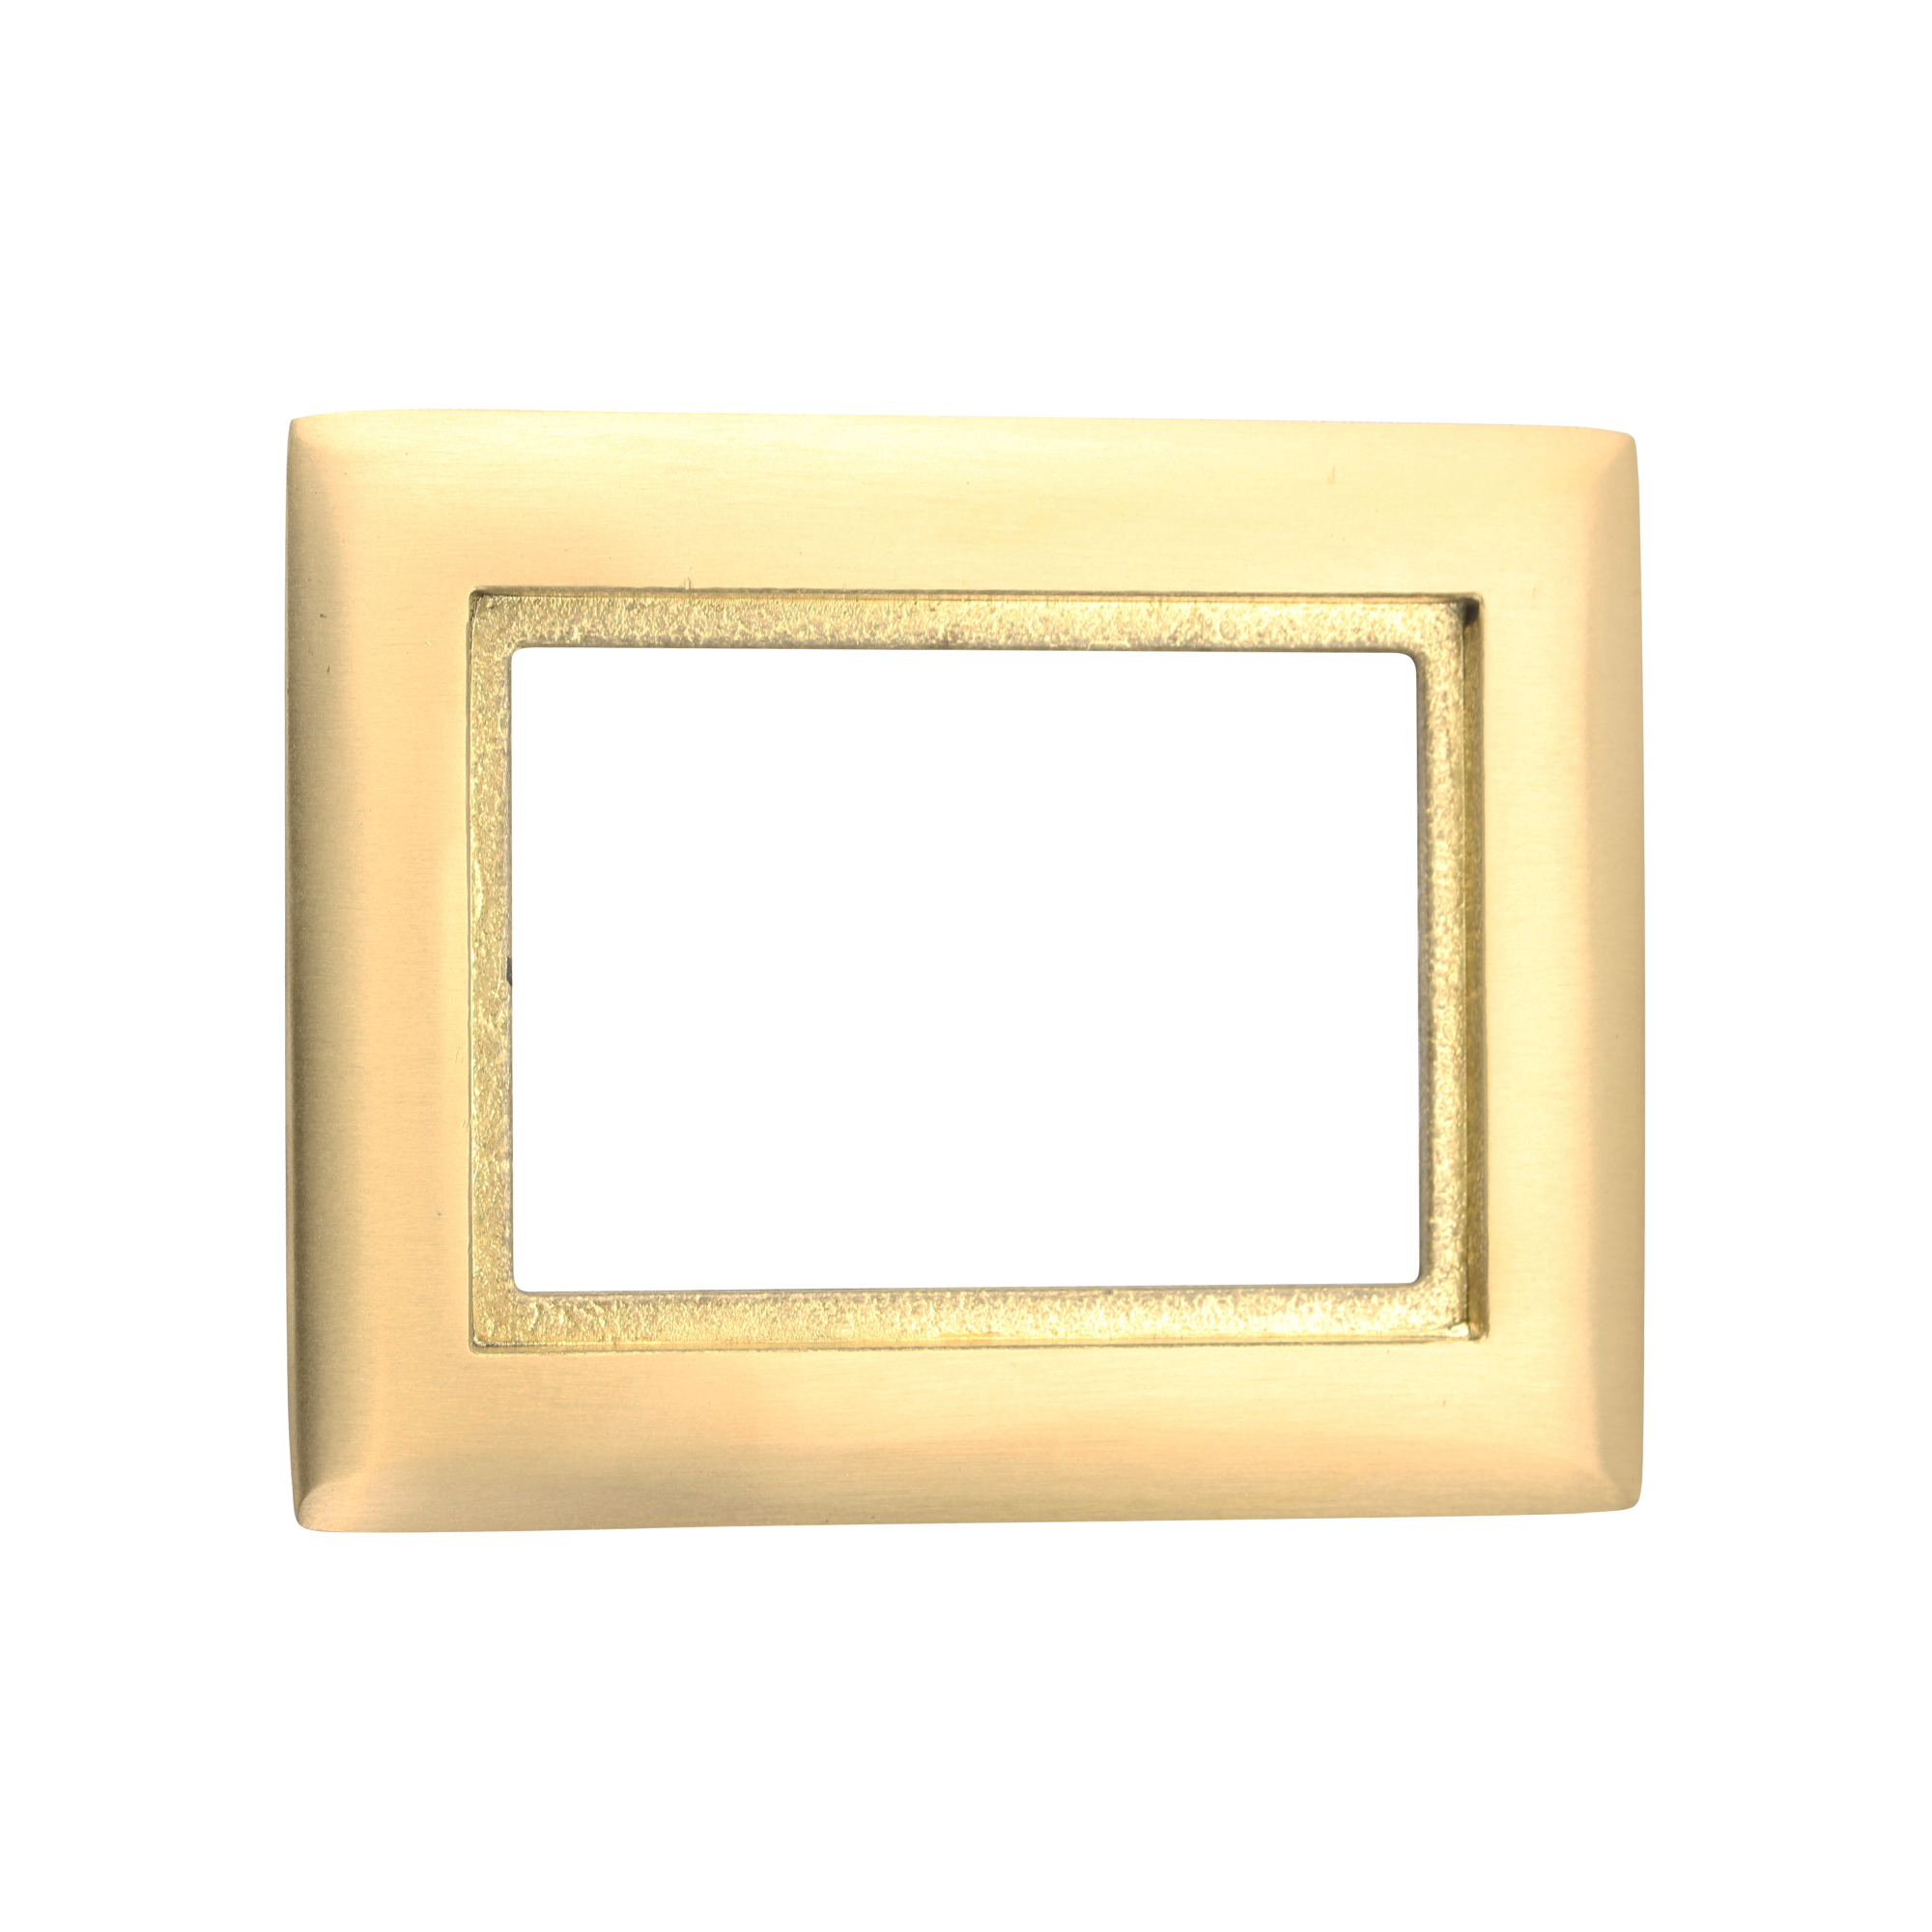 Hubbell, Inc. HUBBELL SYSTEMS SB3083 BRASS SINGLE GANG FLOOR BOX CARPET FLANGE